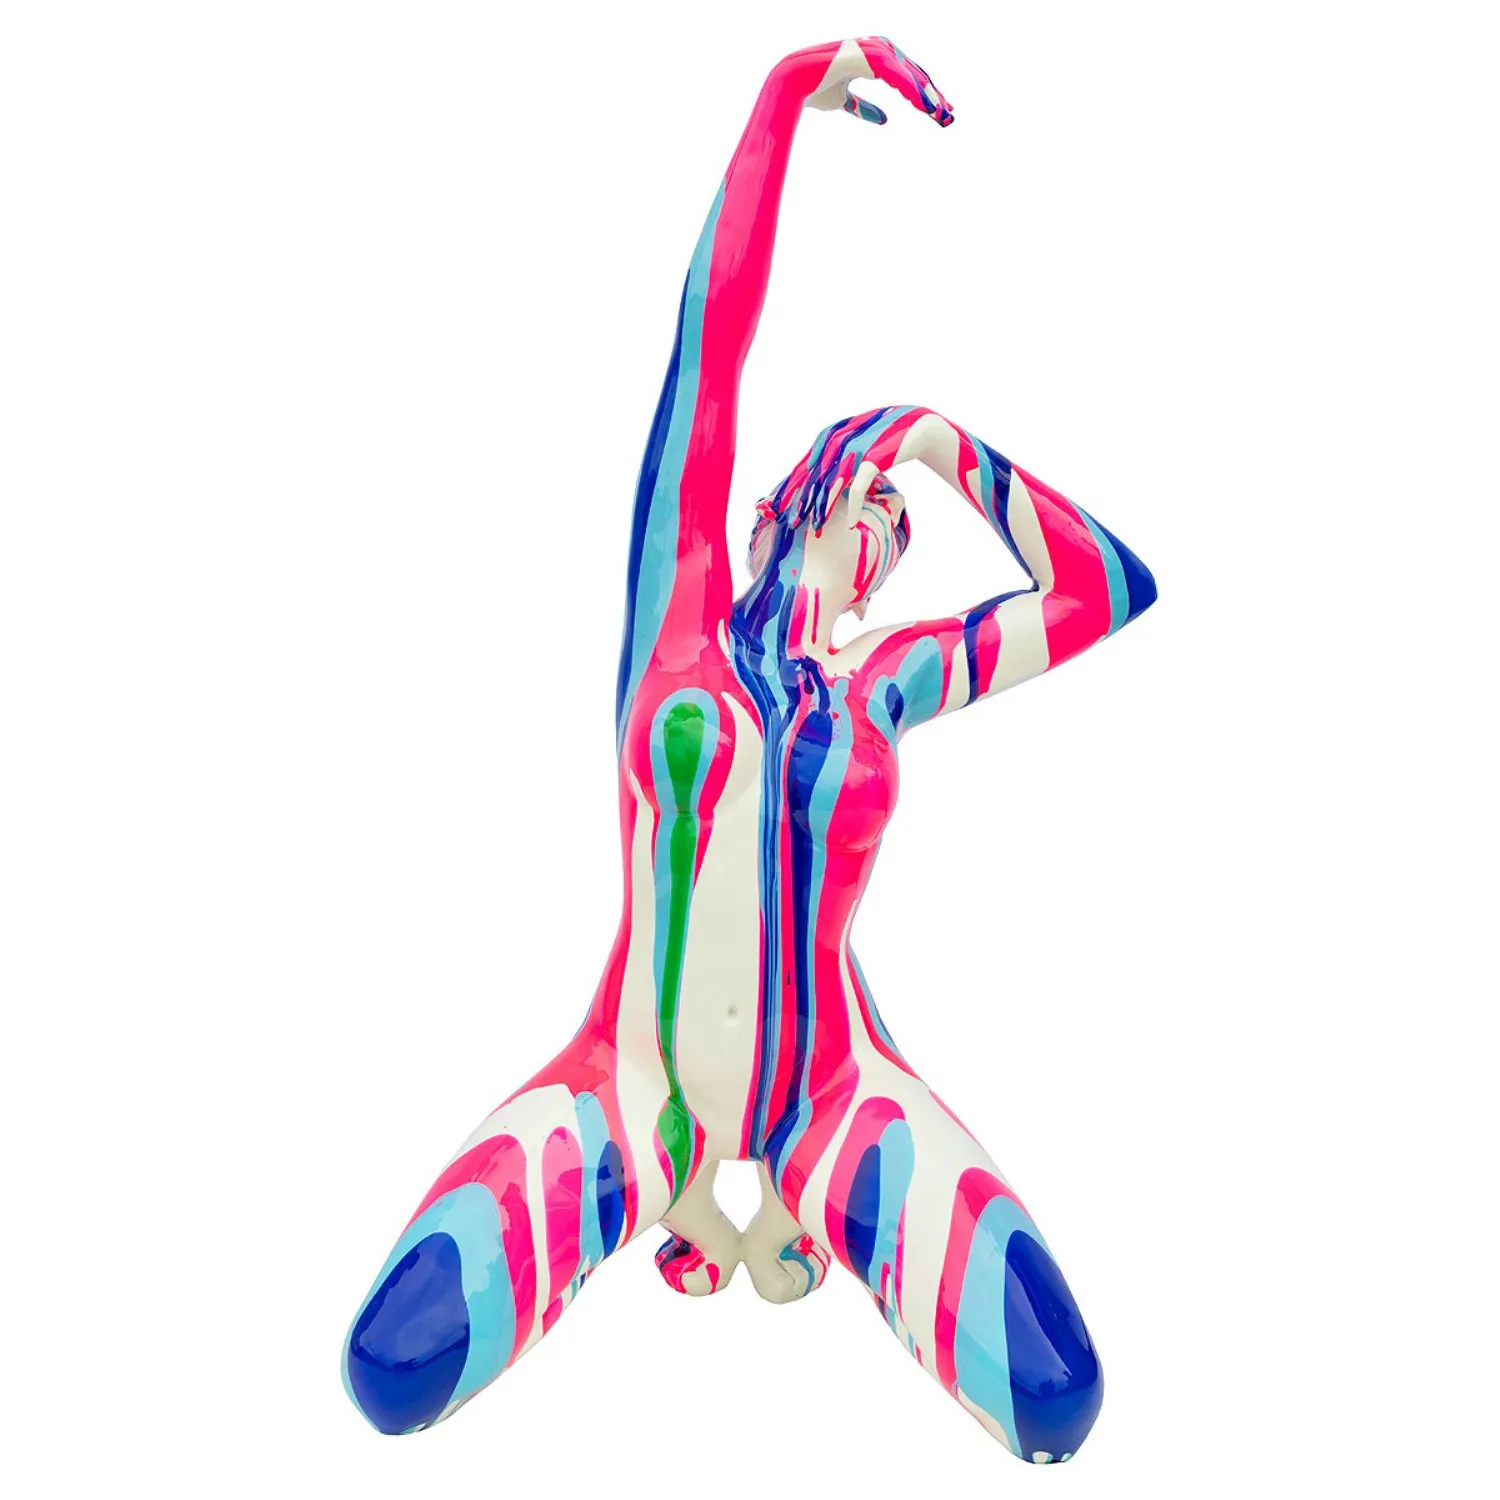 Amorous Pink and Blue Yoga Lady Sculpture